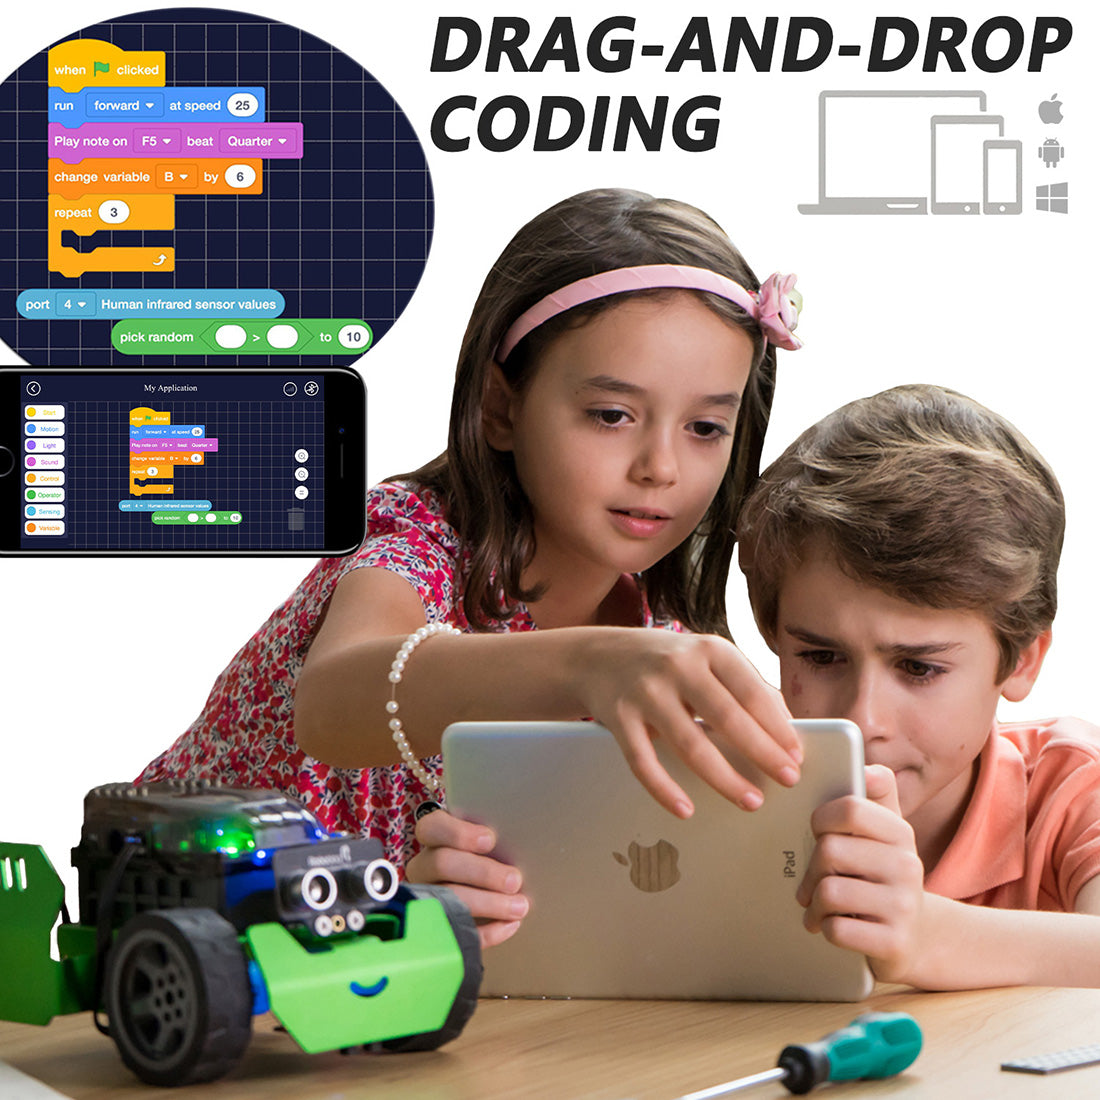 Robobloq Q-Scout STEM Kits For Kids Ages 8-12, Programmable Toys, Learn  Robotics, Electronics, Scratch, Arduino and Python - AliExpress